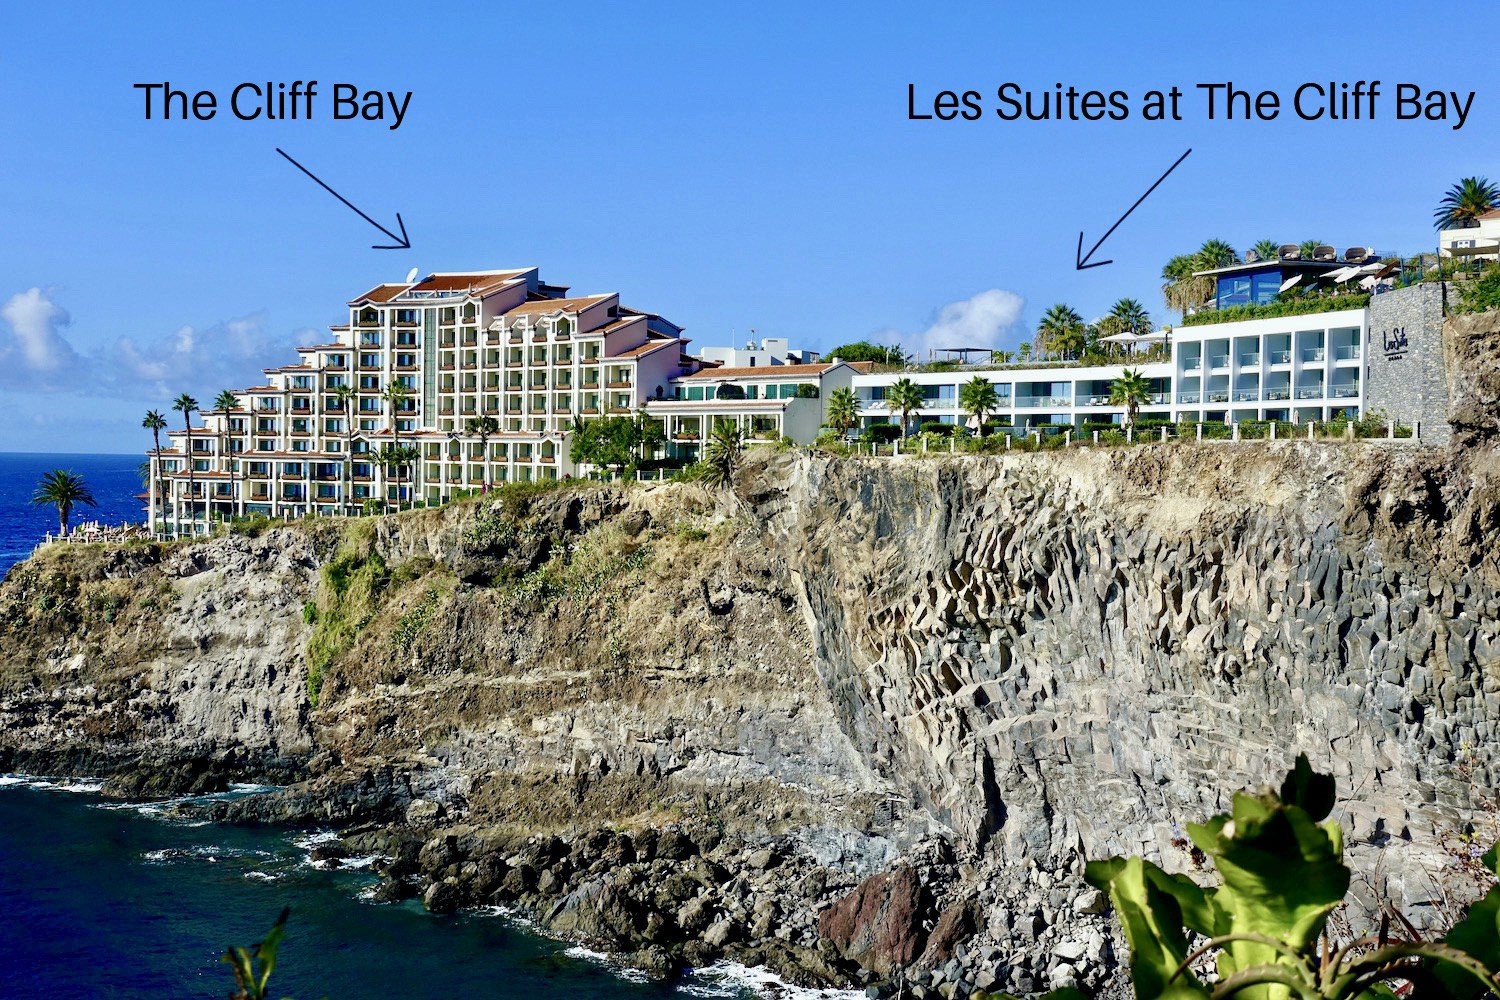 Les Suites at The Cliff Bay Madeira & The Cliff Bay